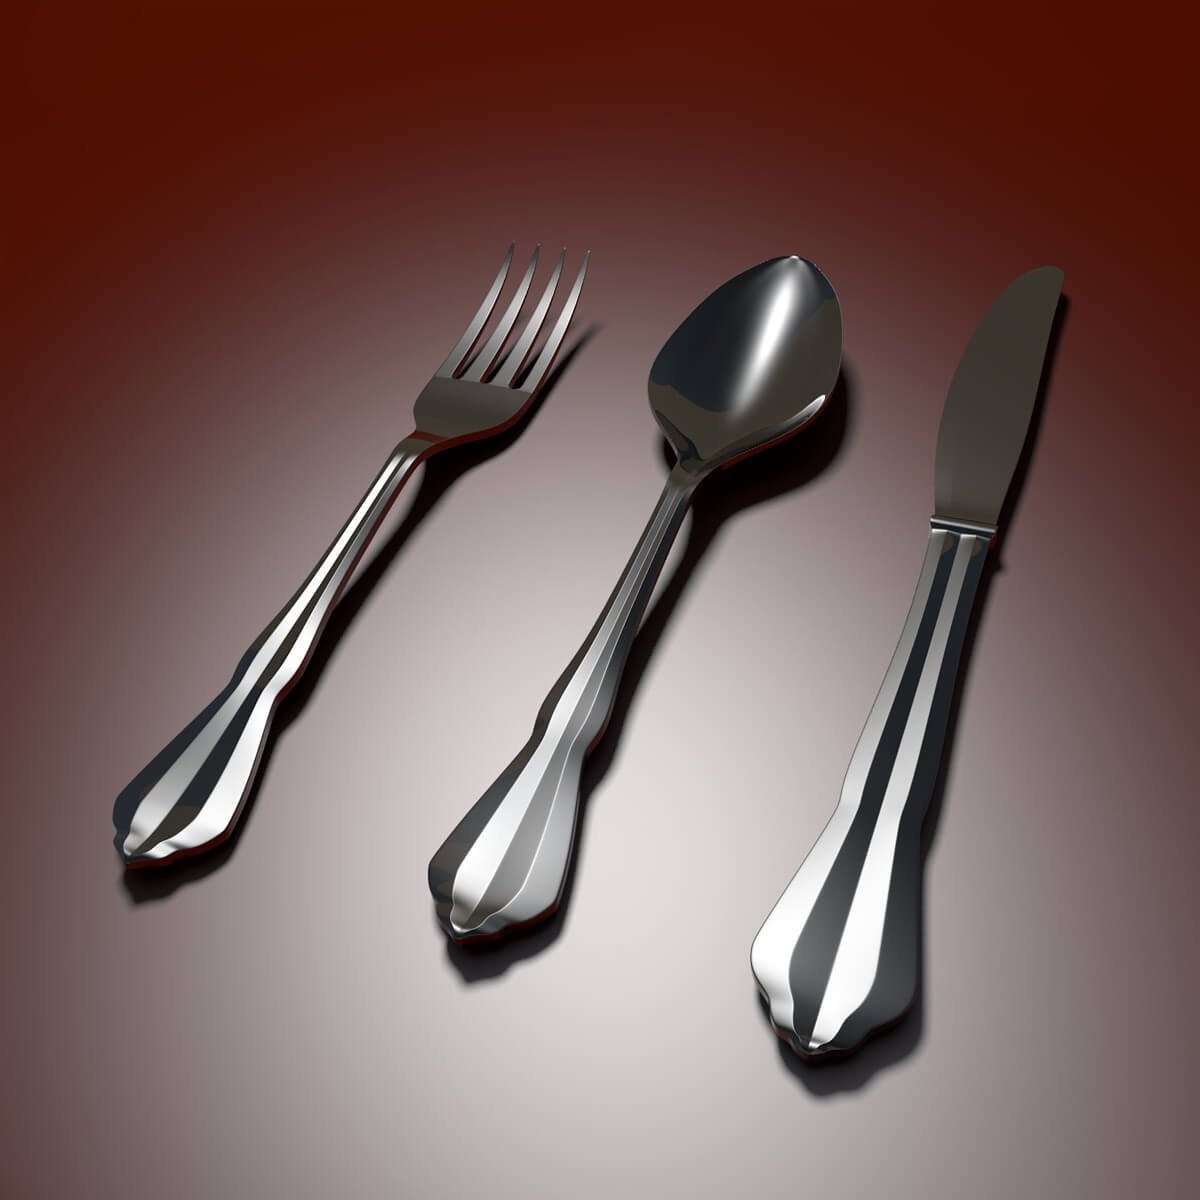 Spoons, Table Knife and Cutlery